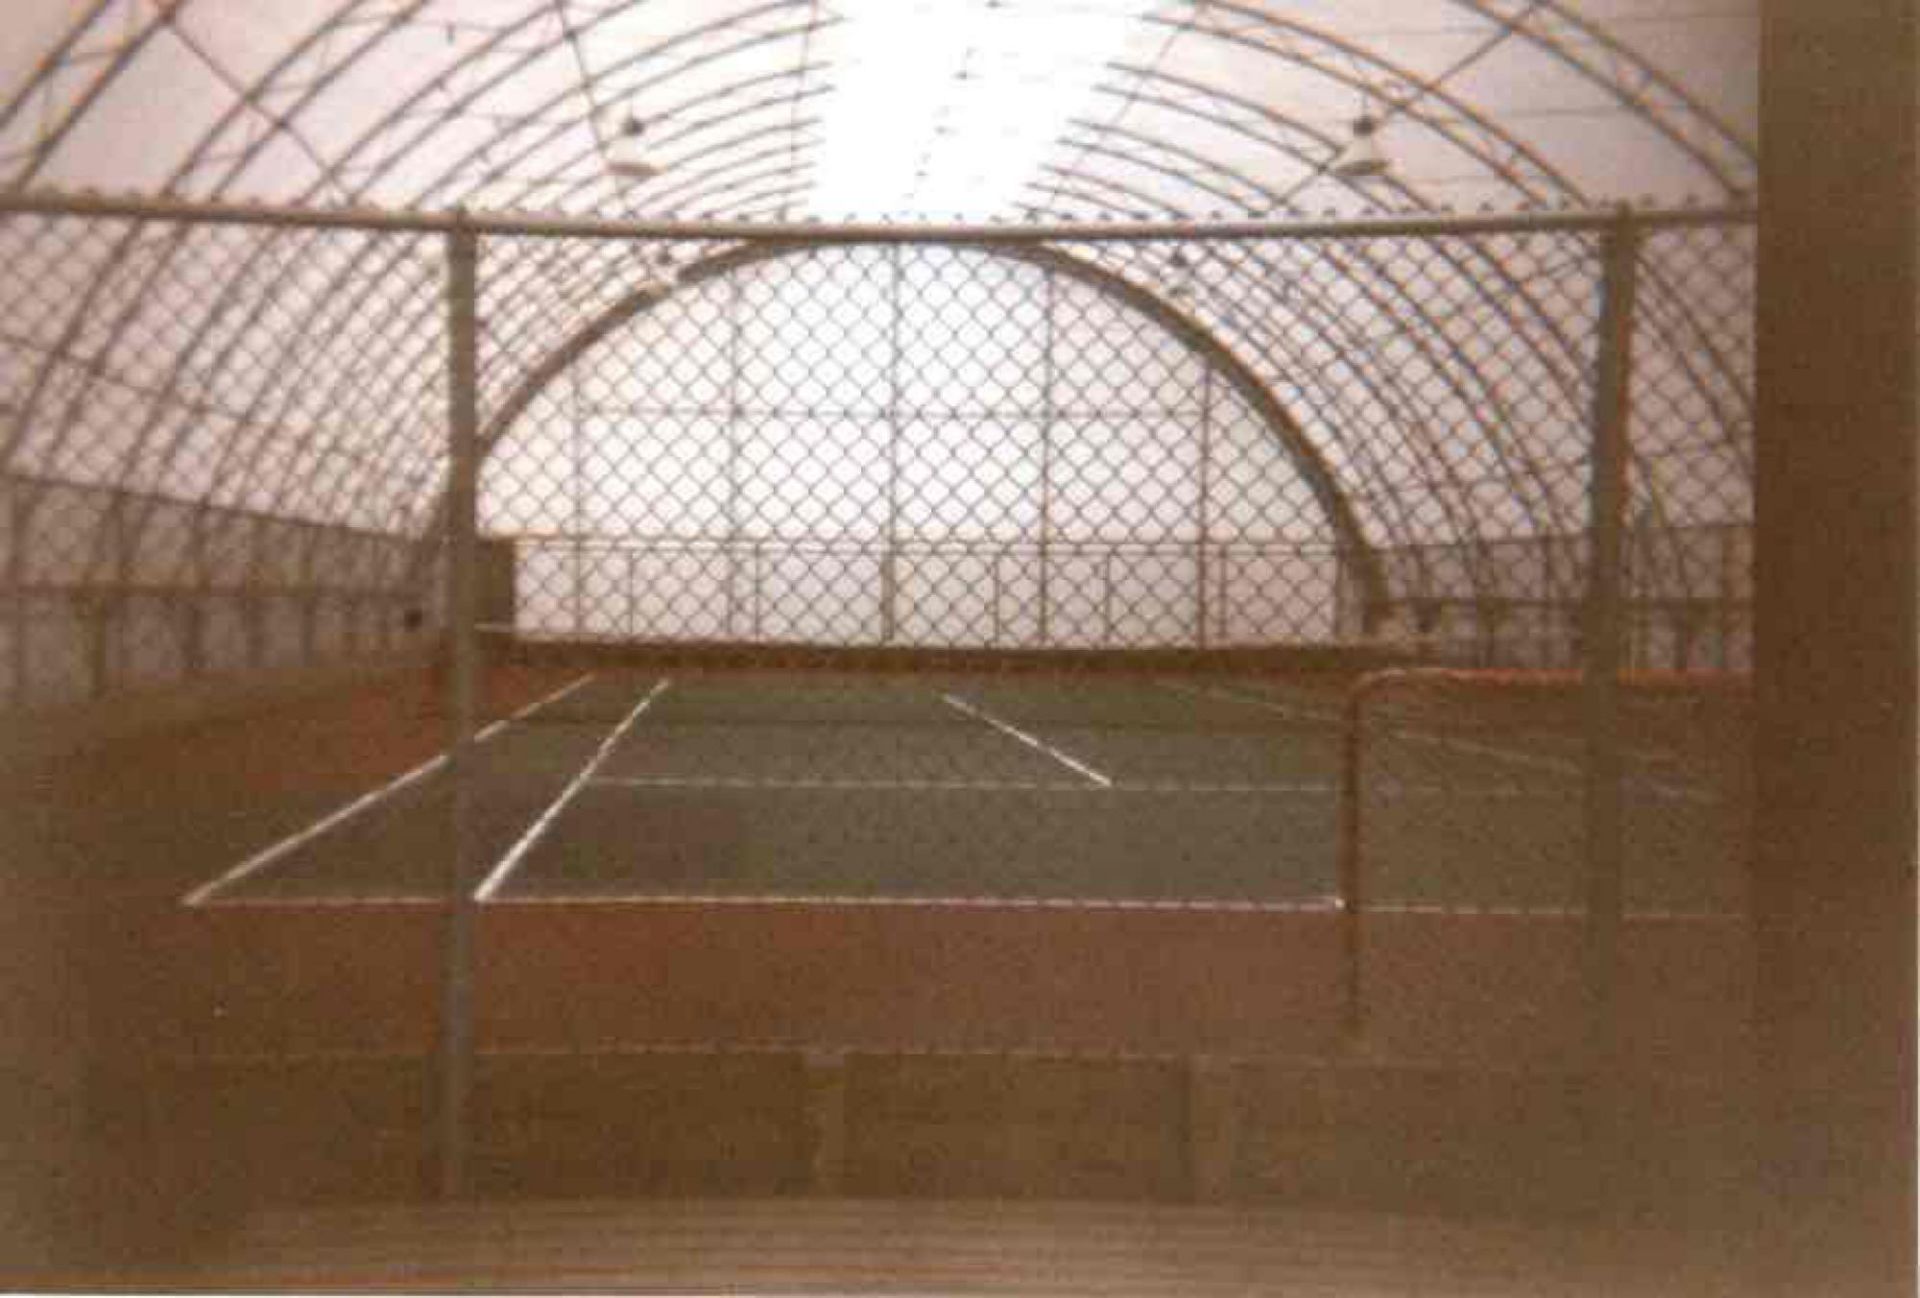 Sports Court, Over 6,000sqft. - Image 8 of 8